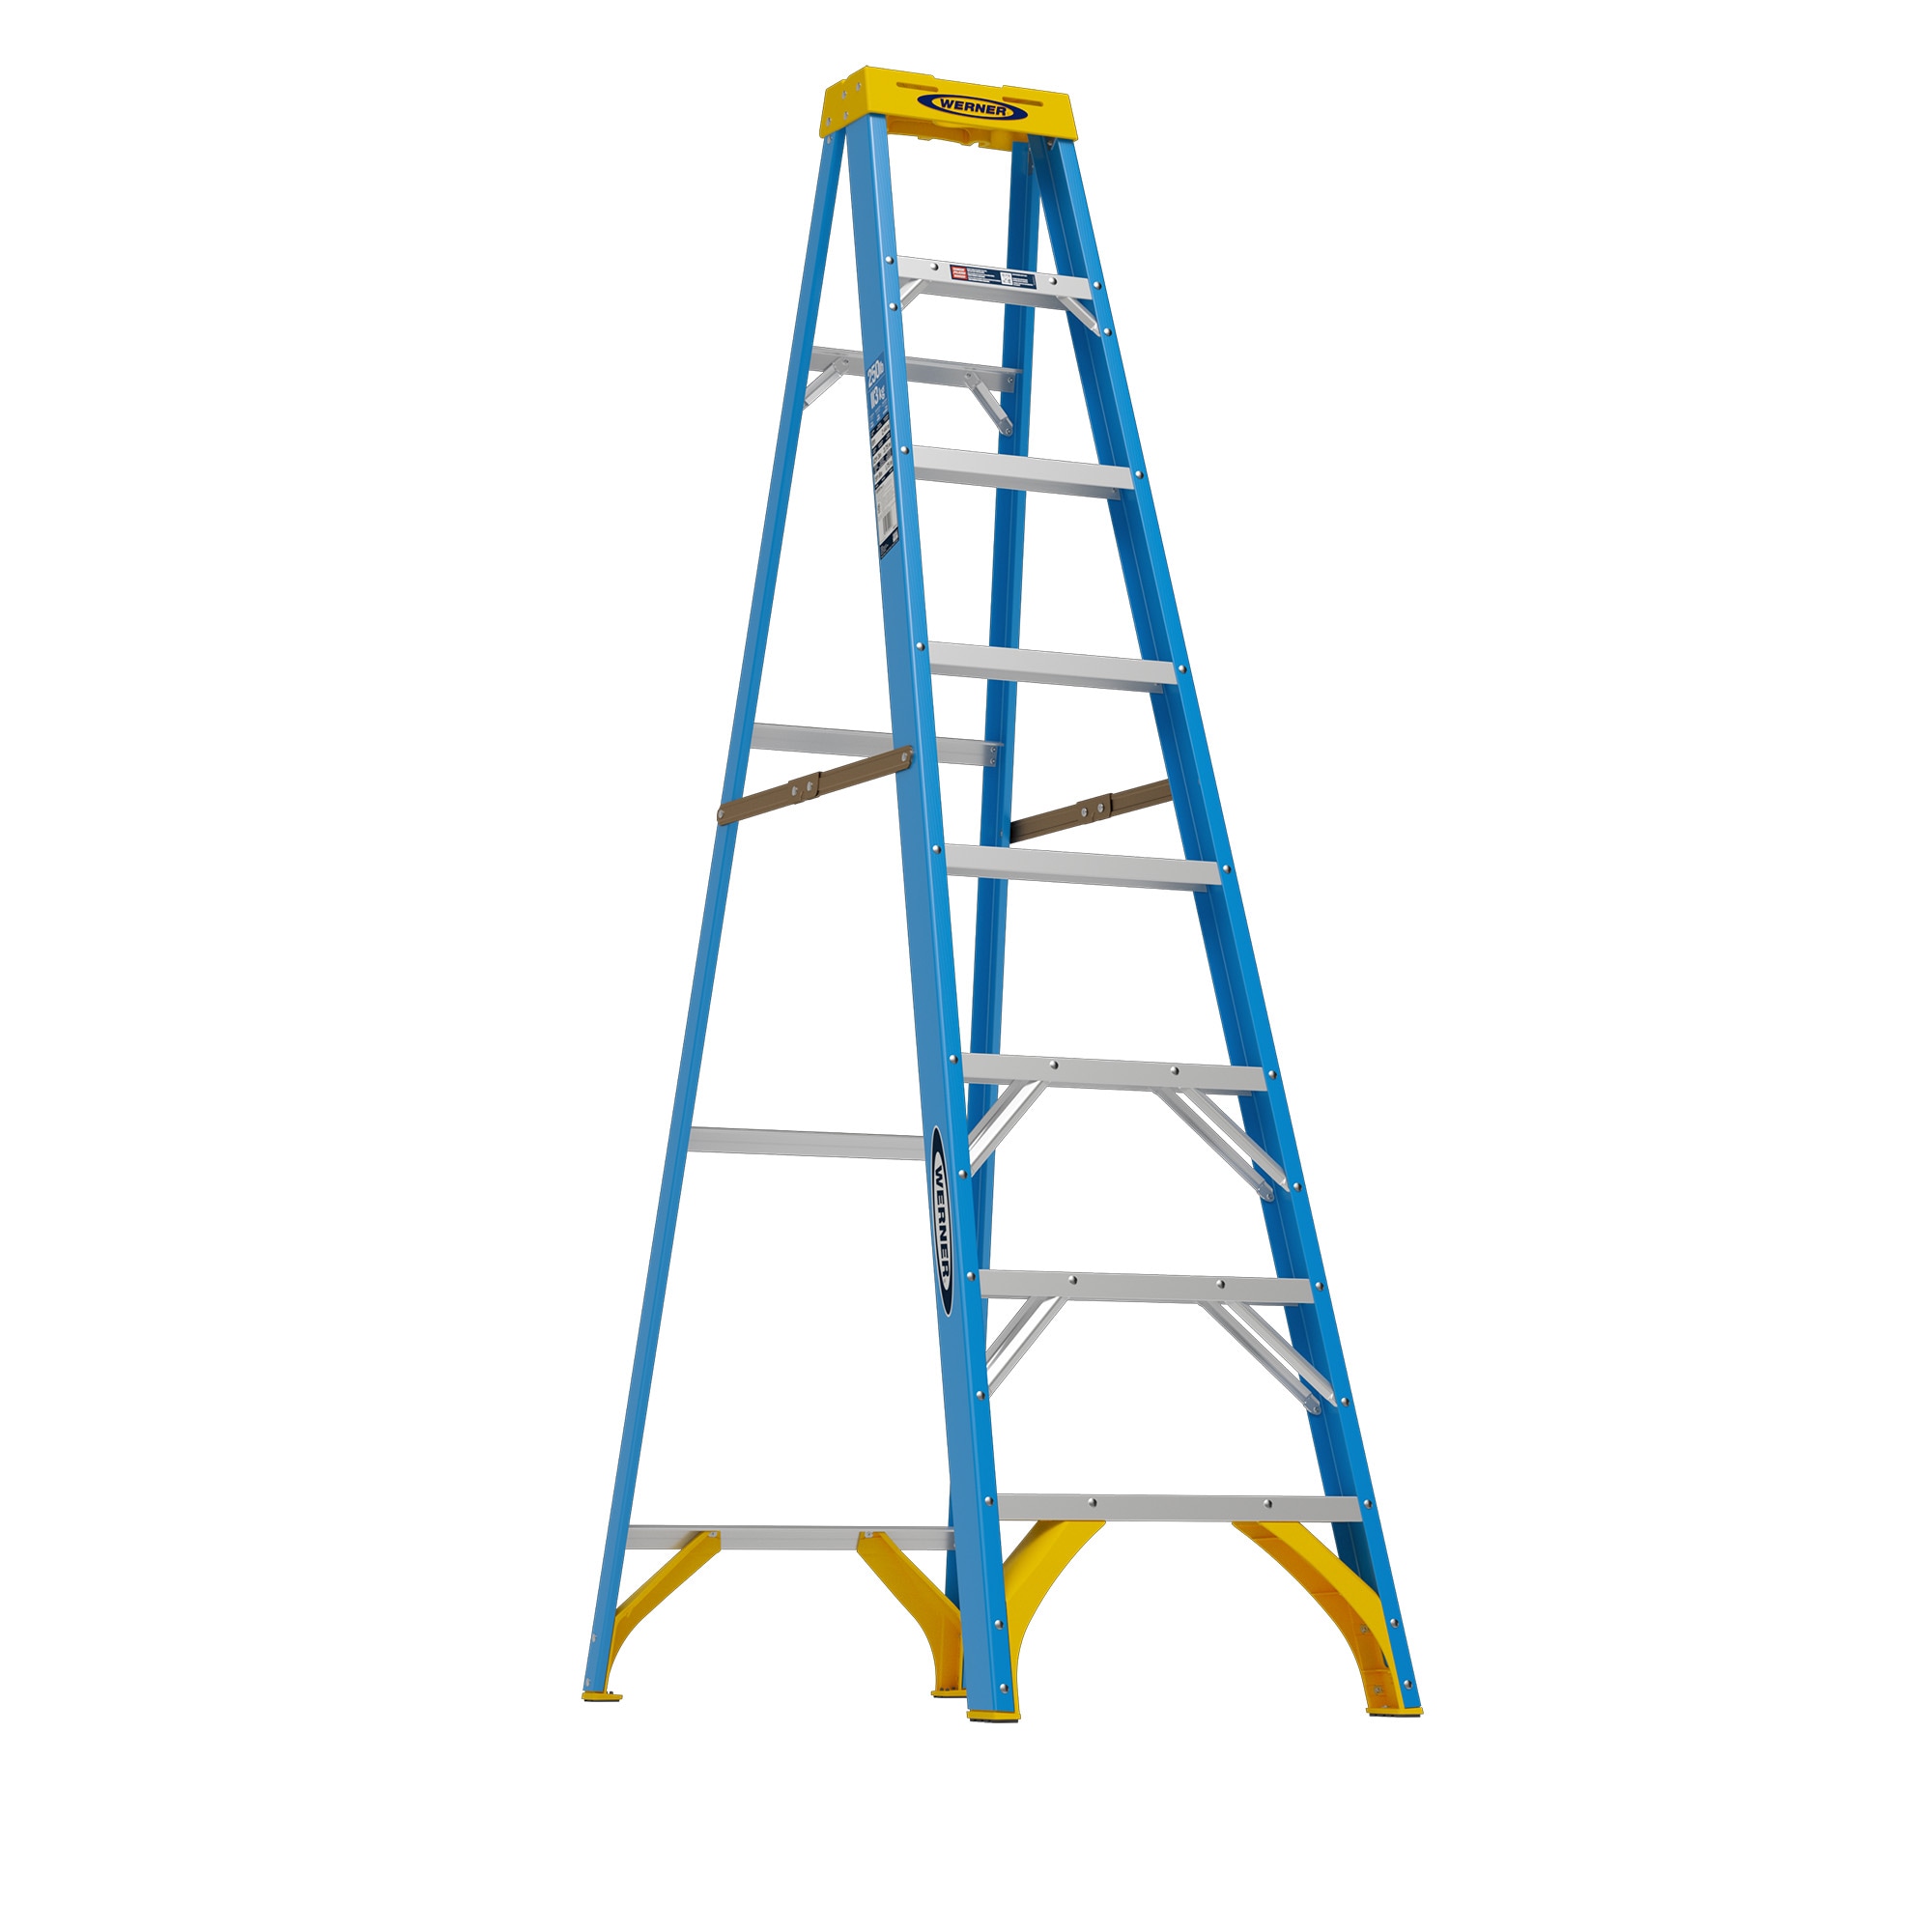 12 Foot Ladder - Product Information, Latest Updates, and Reviews